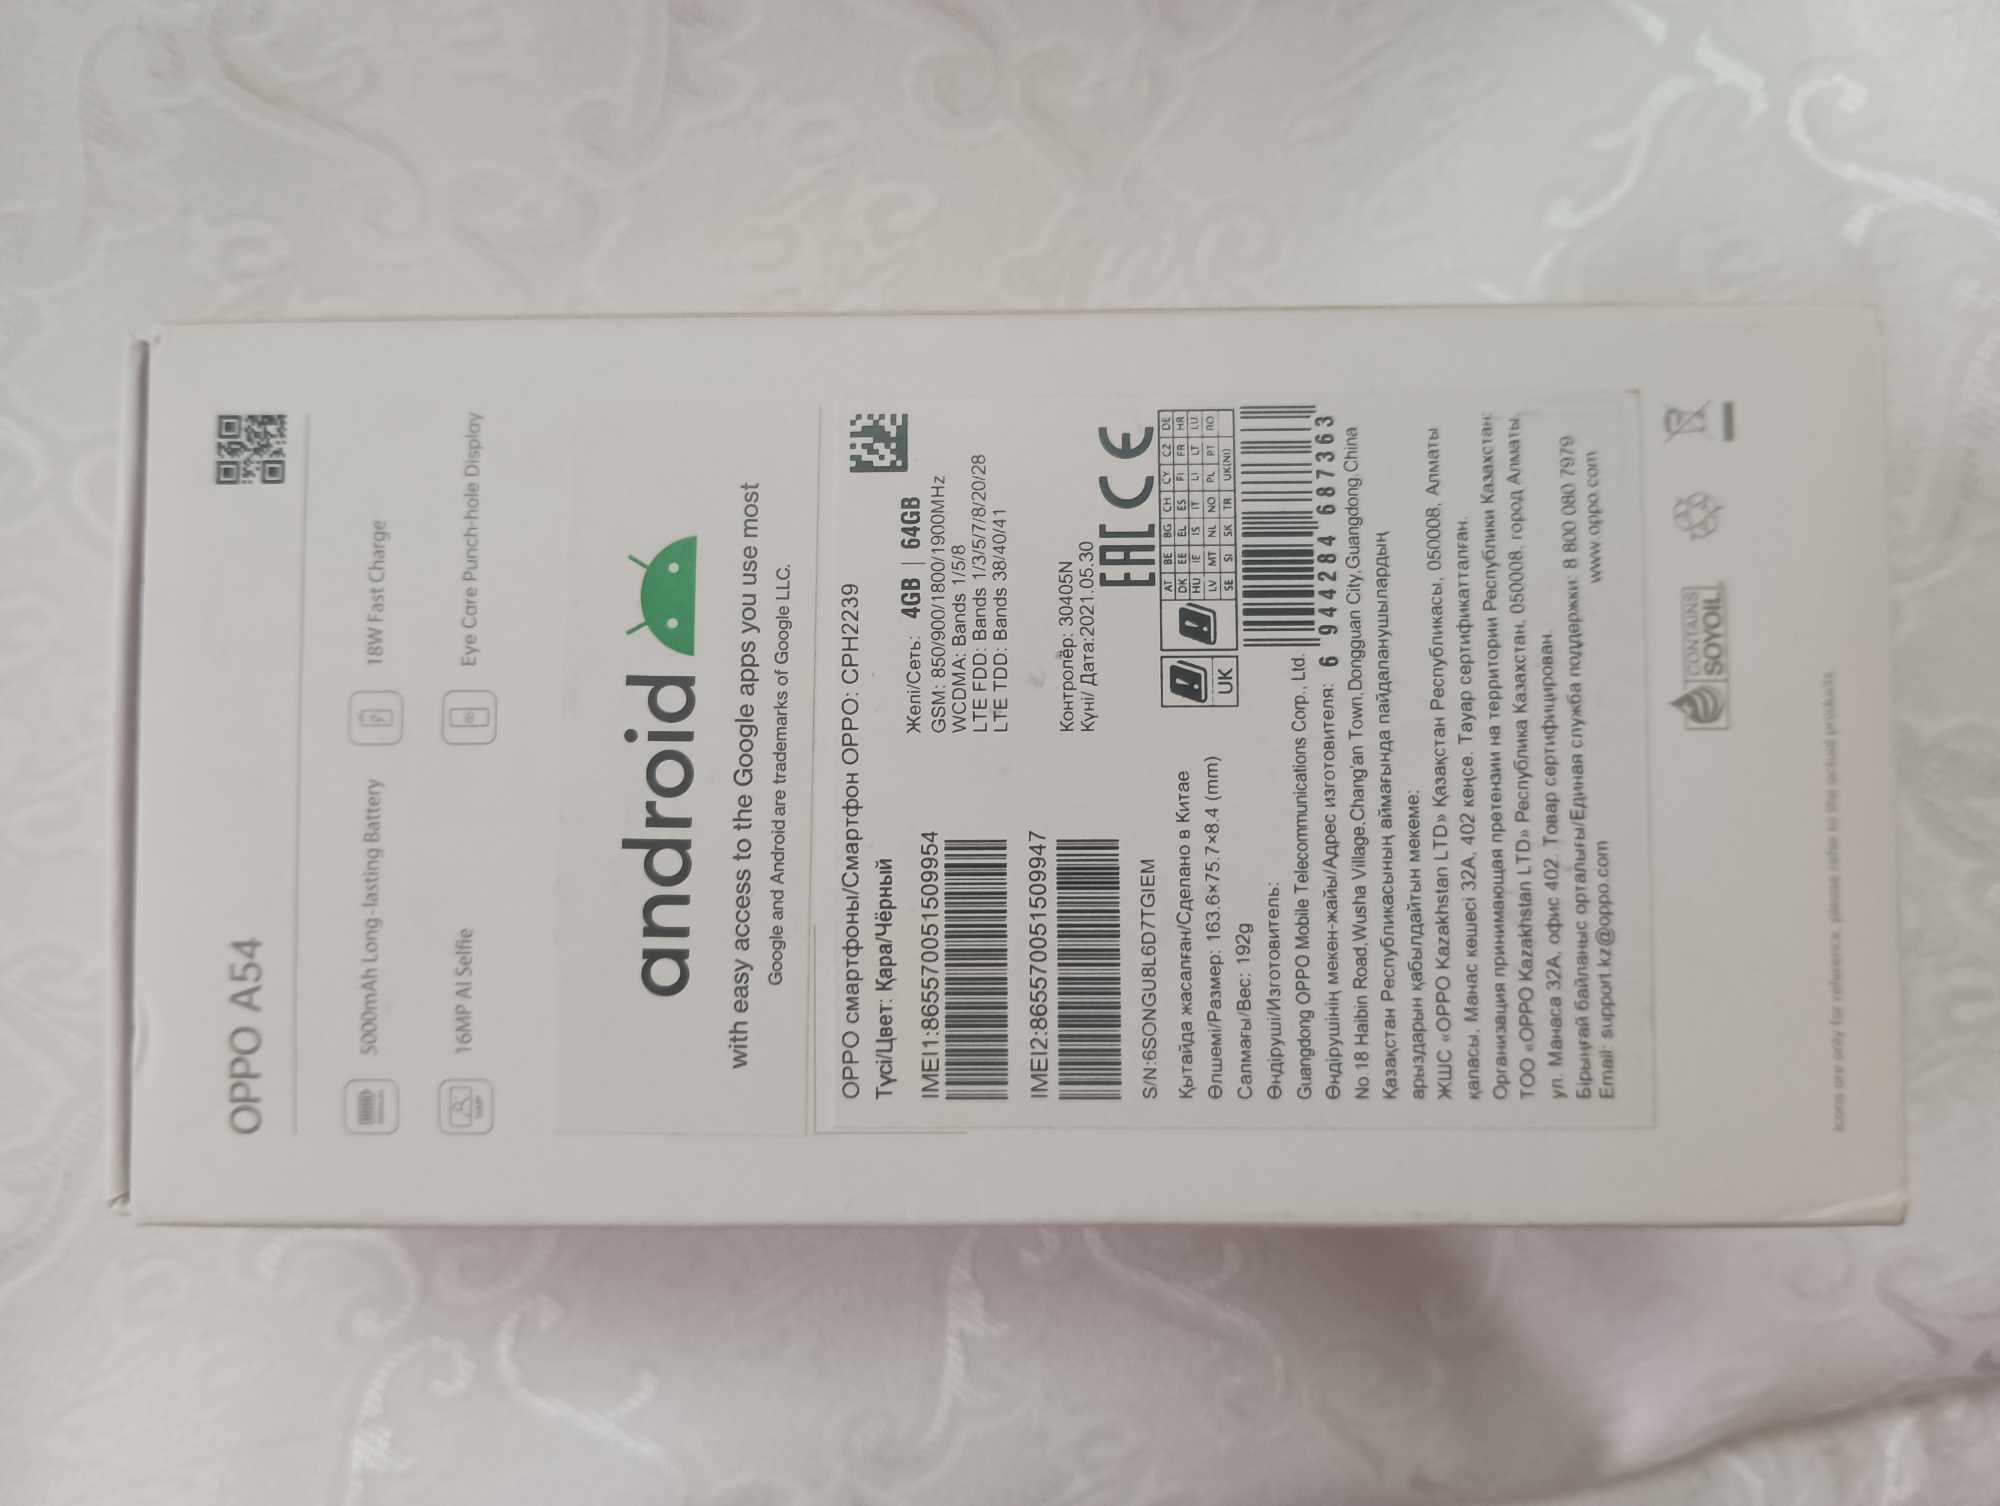 Oppo a54 64gb blue